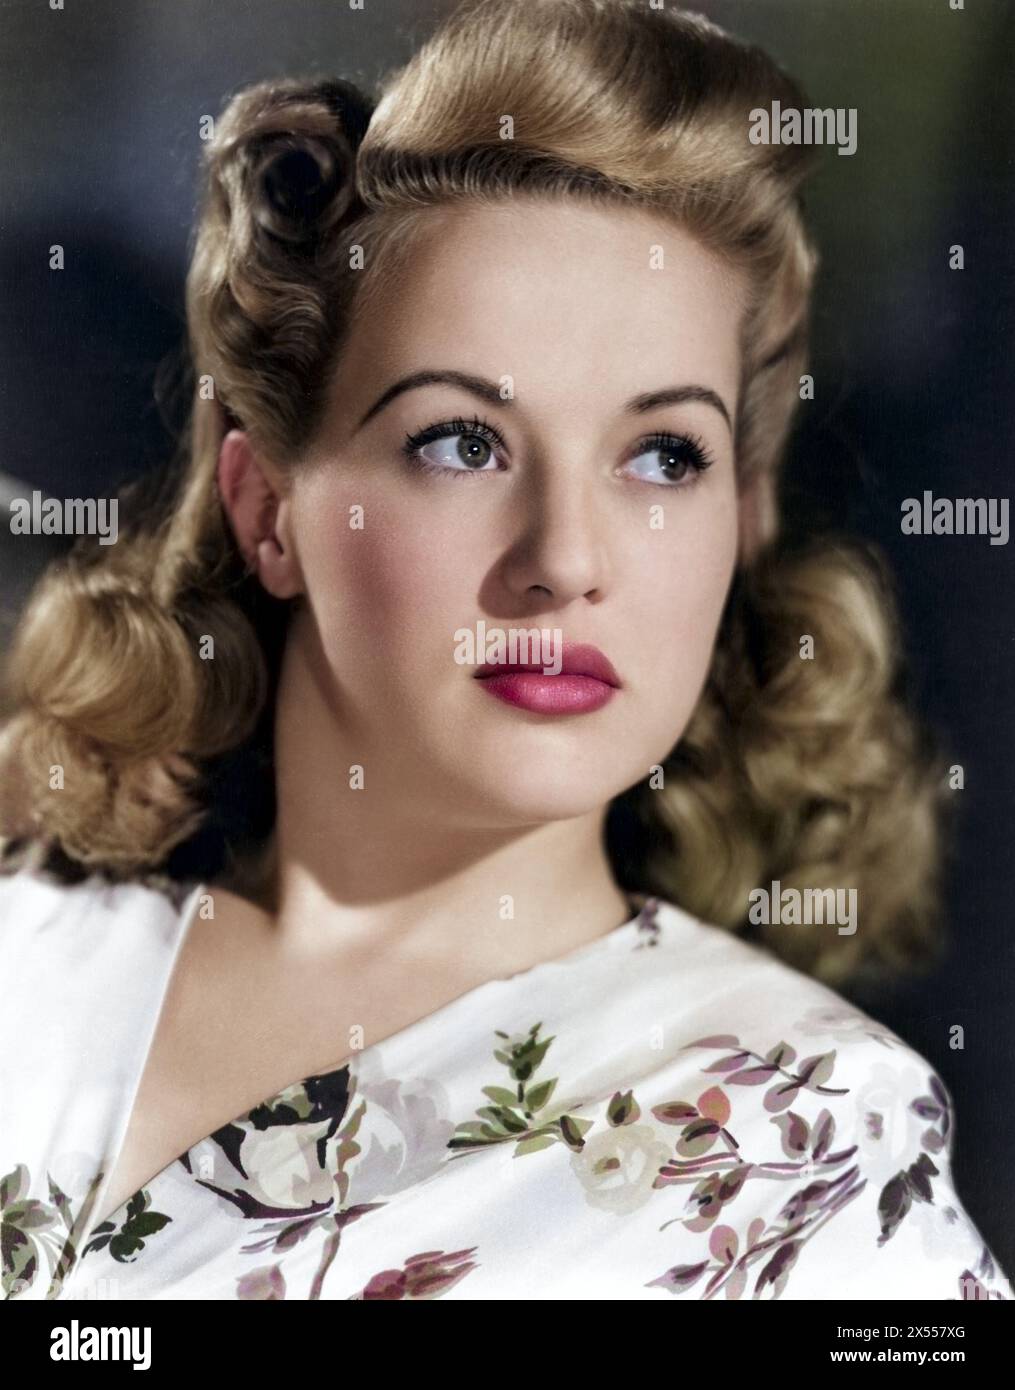 Grable, Betty, 18.12.1916 - 2.7.1973, American actress, portrait, circa 1942, ADDITIONAL-RIGHTS-CLEARANCE-INFO-NOT-AVAILABLE Stock Photo